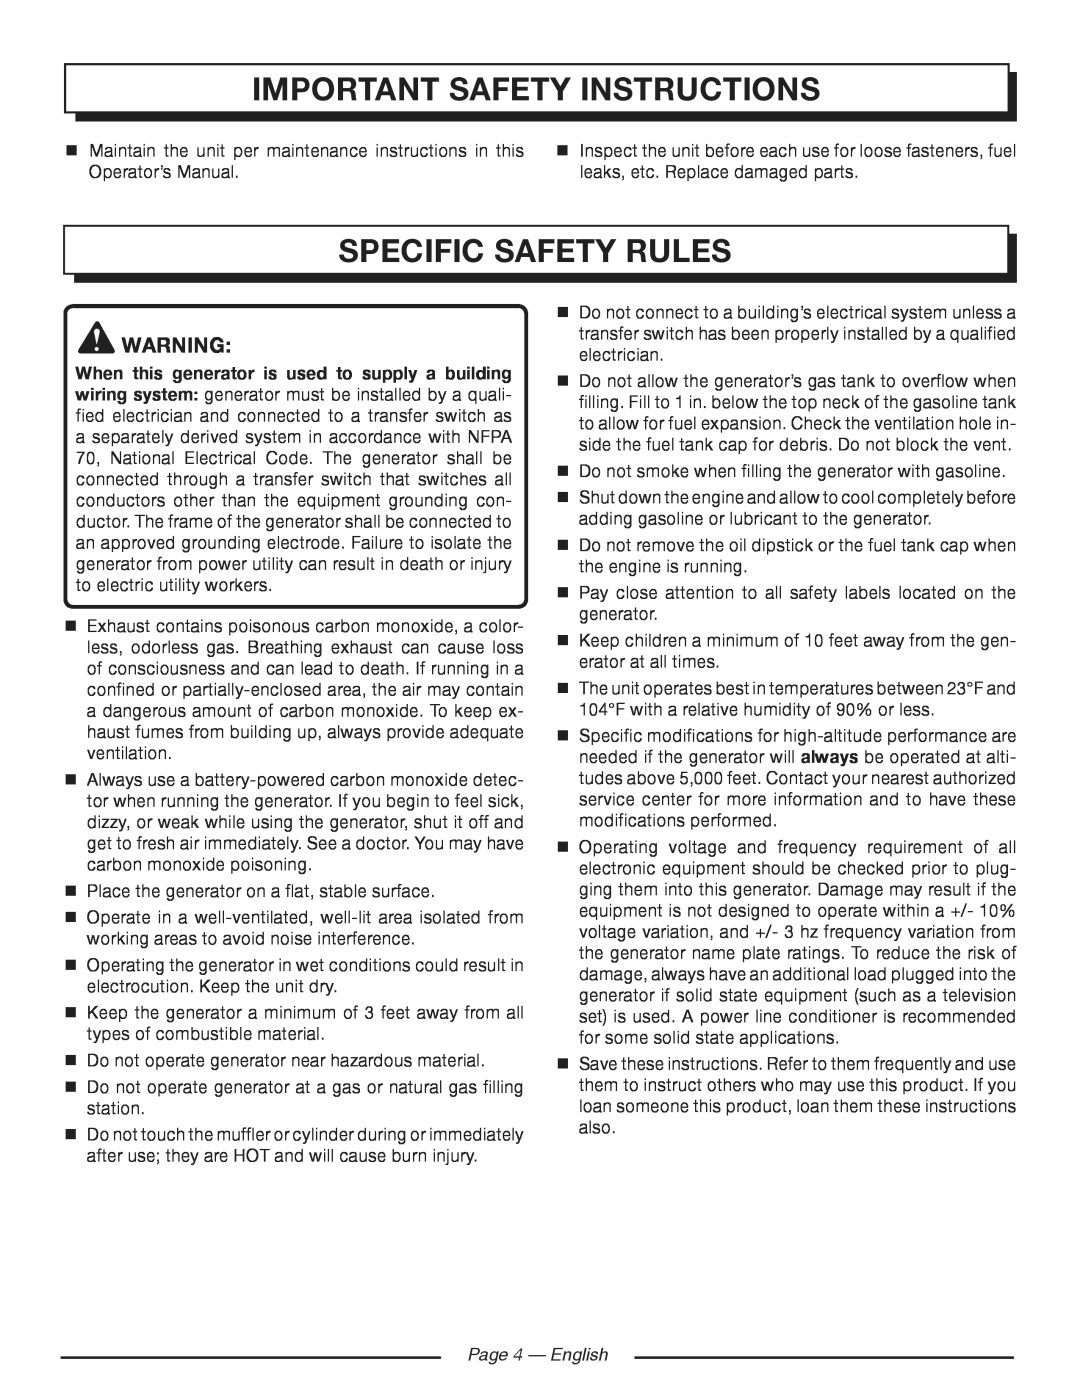 Homelite HGCA3000 manuel dutilisation Specific Safety Rules, Page 4 - English, important safety instructions 